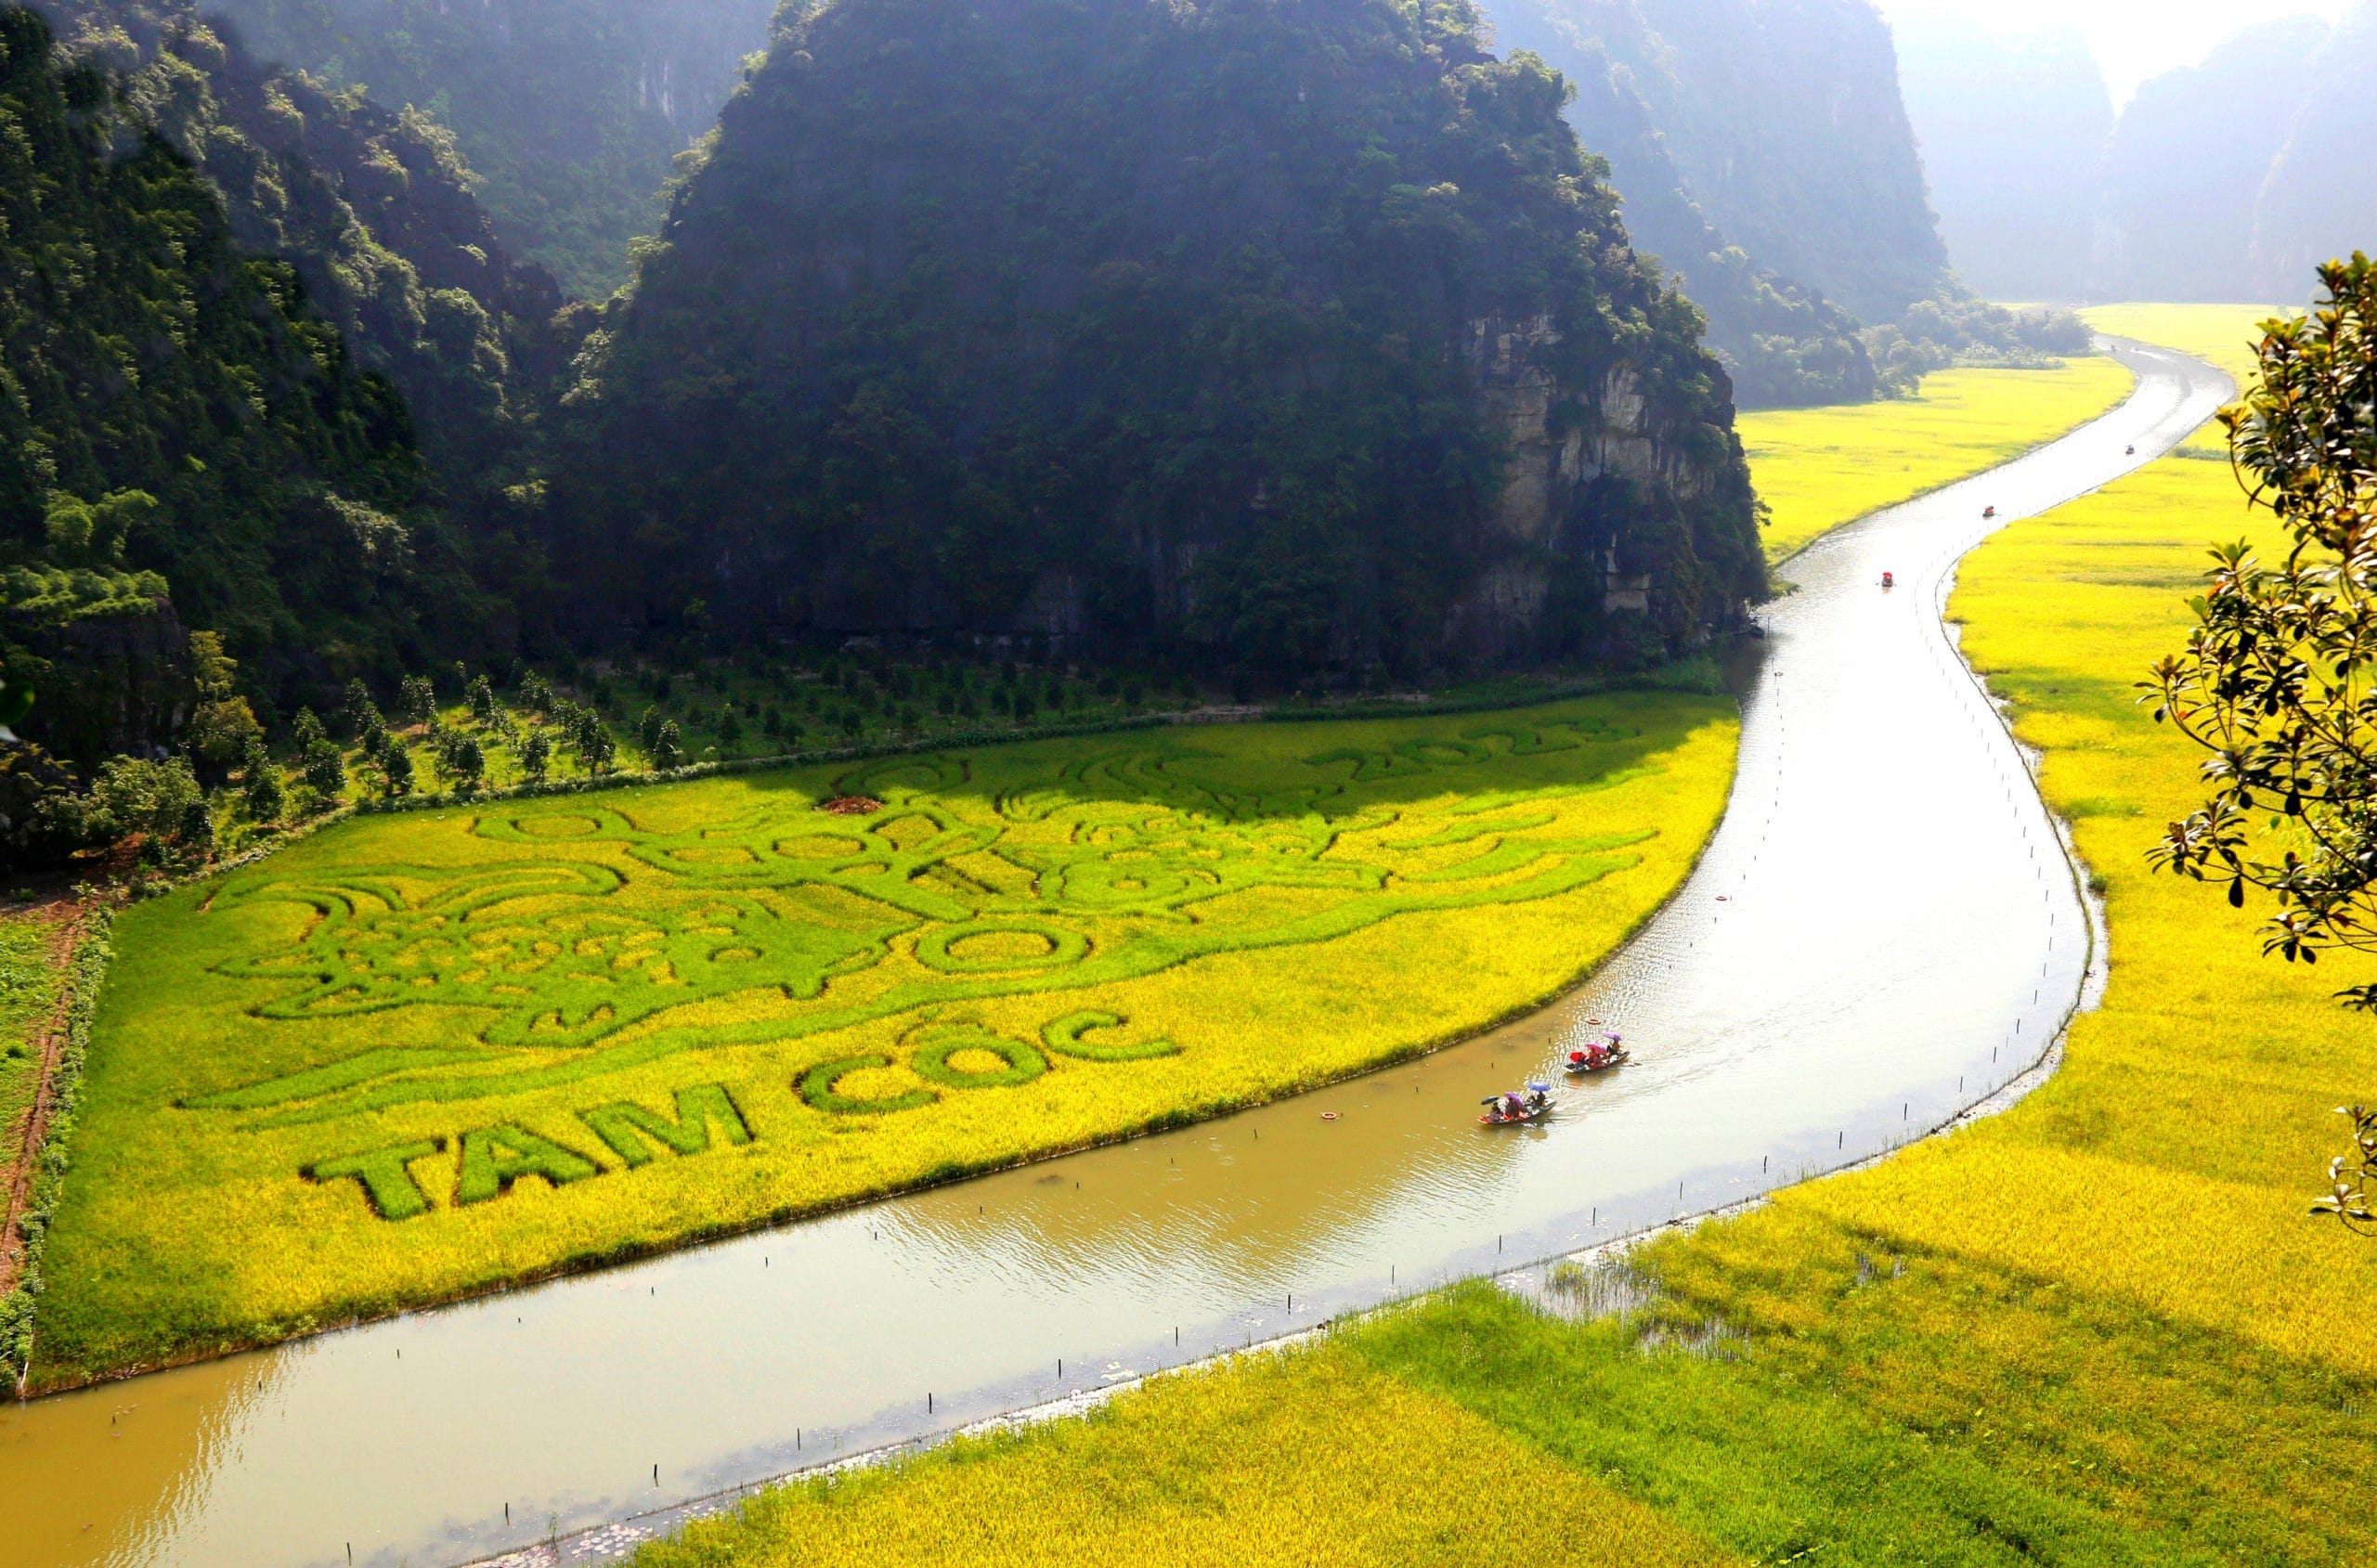 Top 8 Amazing Places to visit on the 2 Days 1 Night Ninh Binh Tour